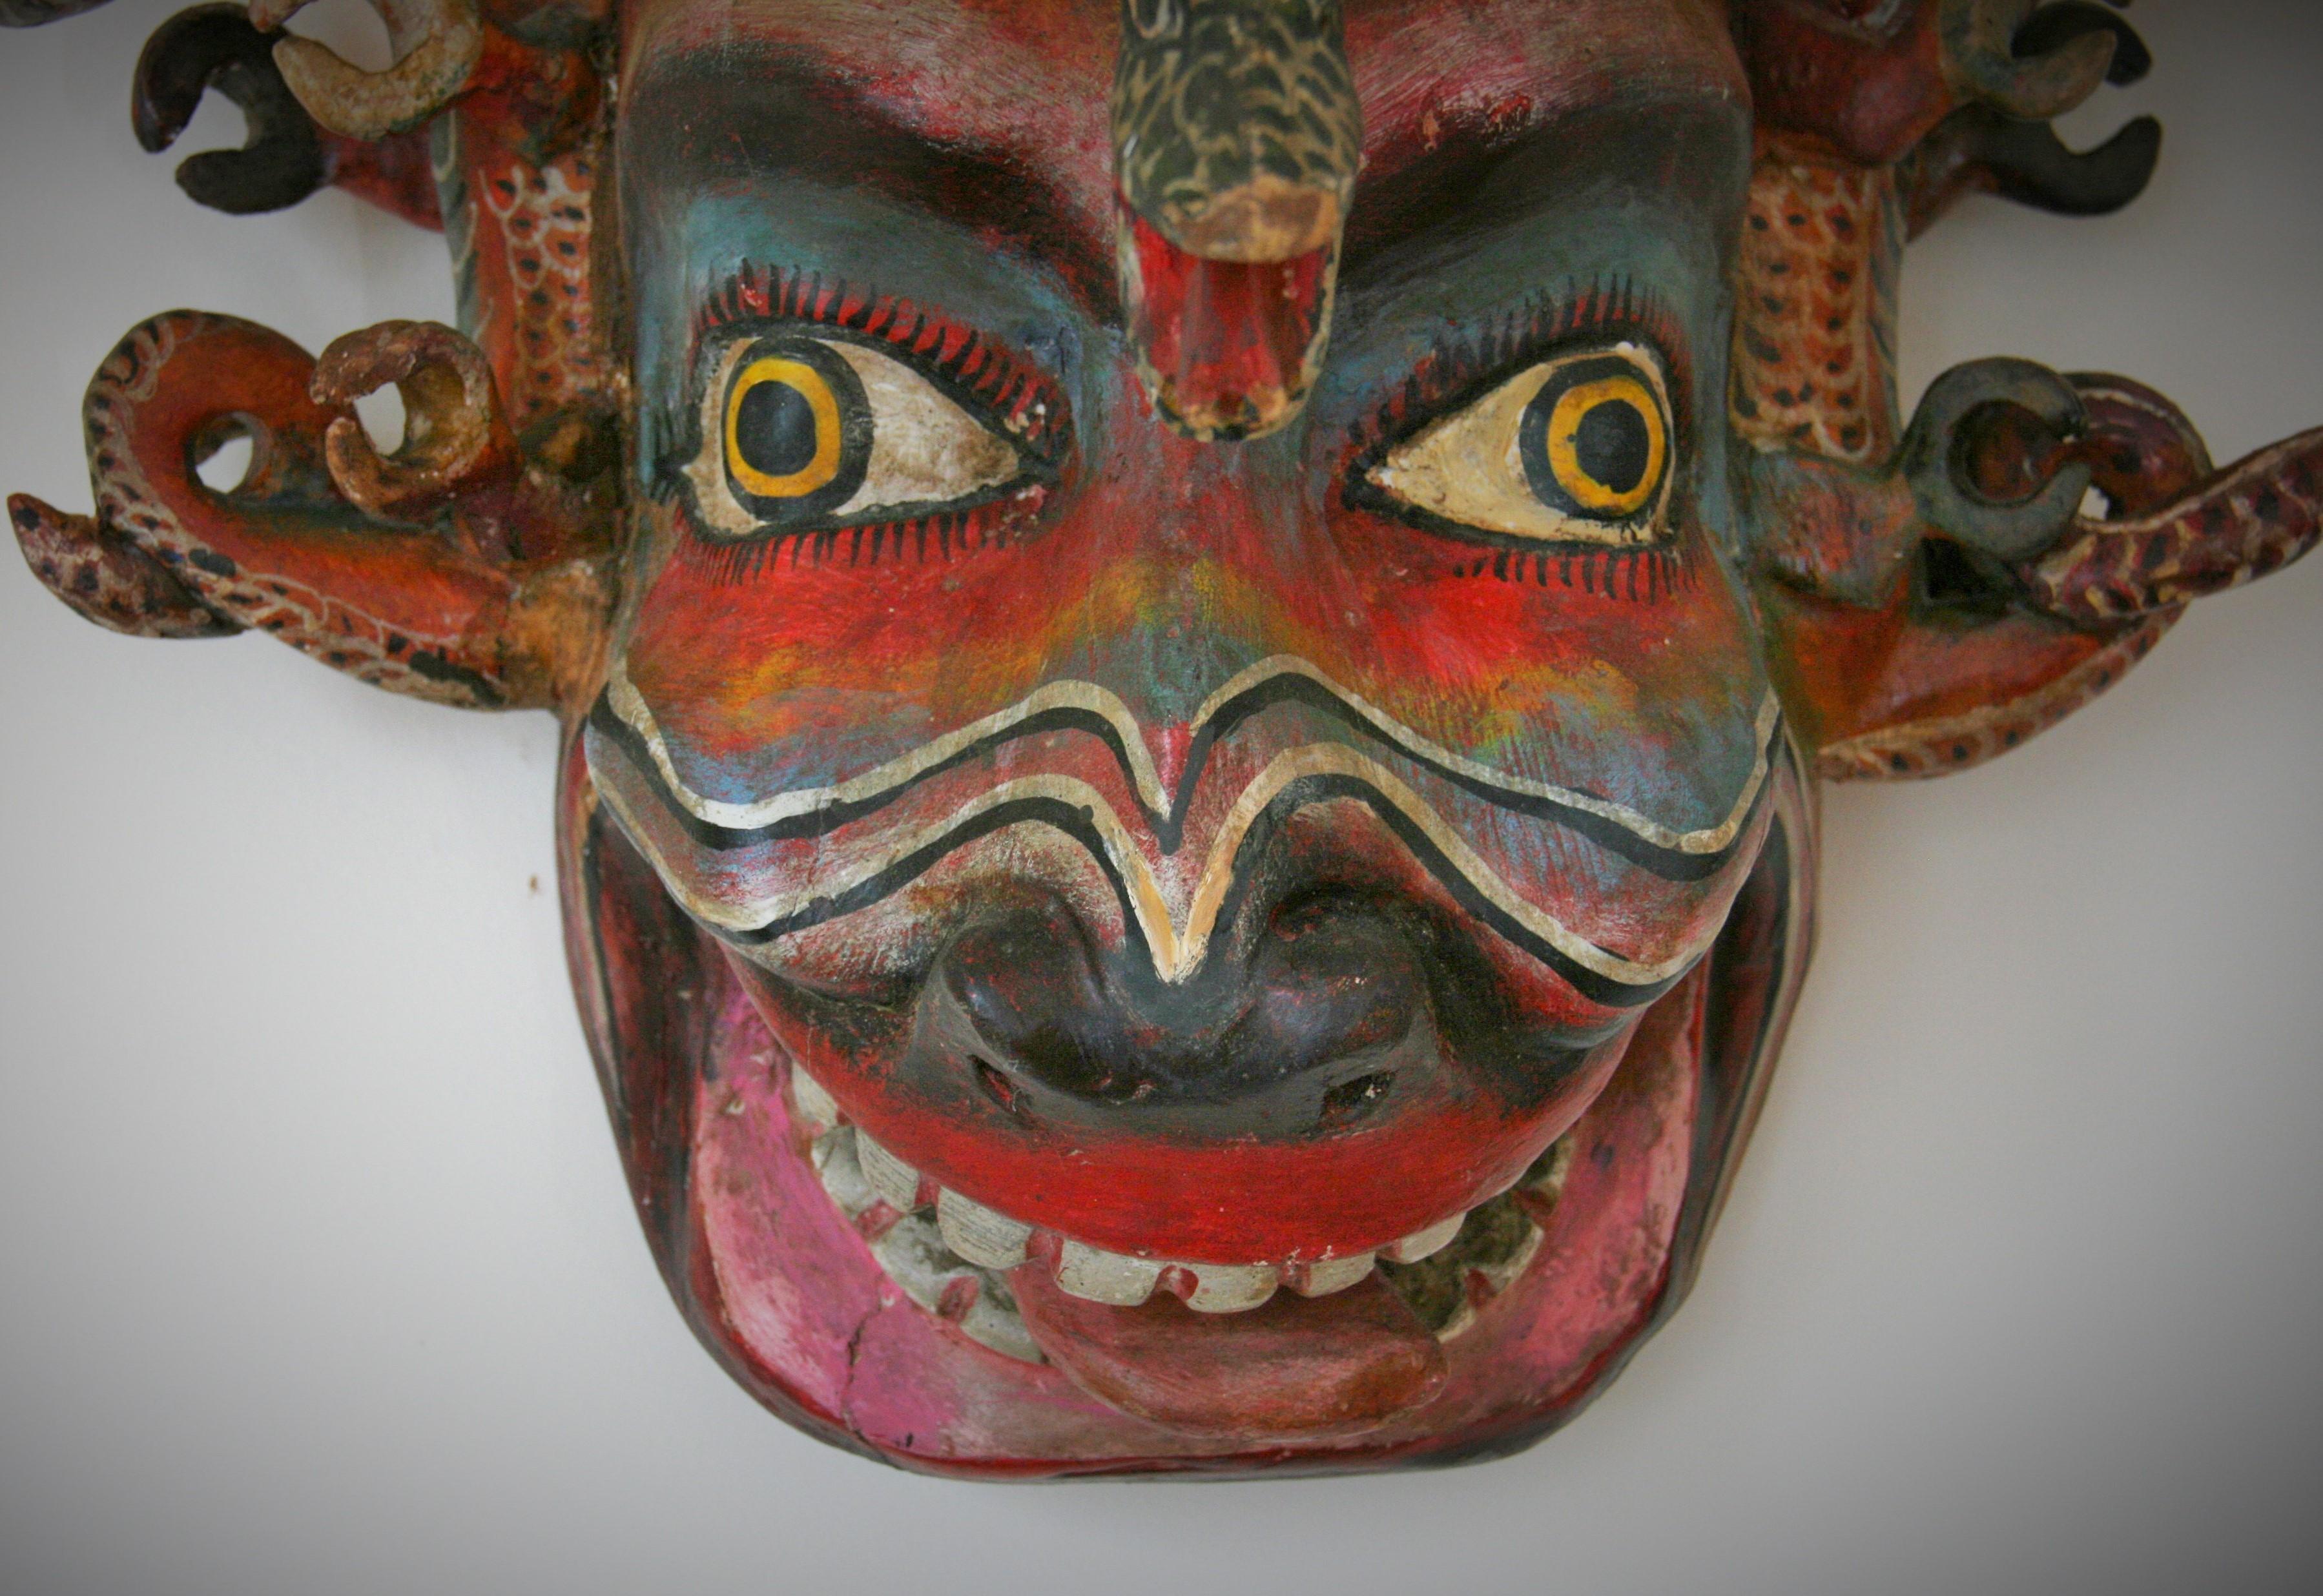 8-195 Intricately carved and painted wood mask of an ornate mythological creature mask with elaborate 3D carving.